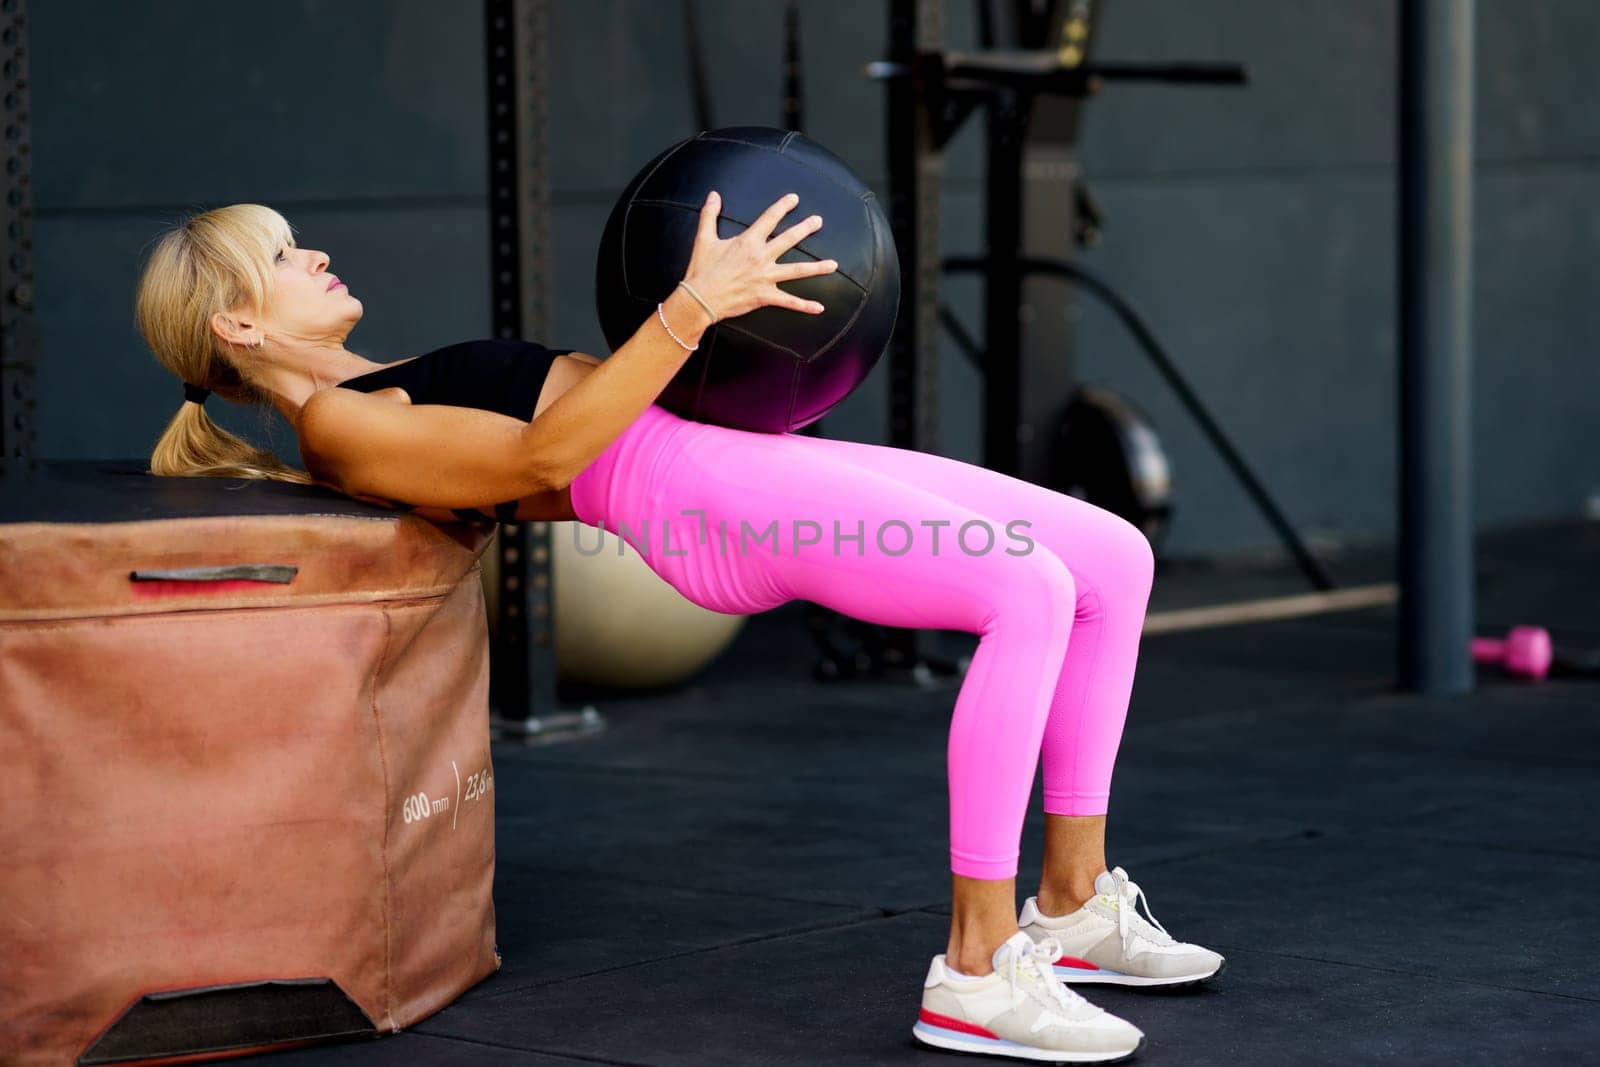 Side view of strong fit female doing exercise with heavy ball while exercising against fitness equipment in modern gym during workout and looking up